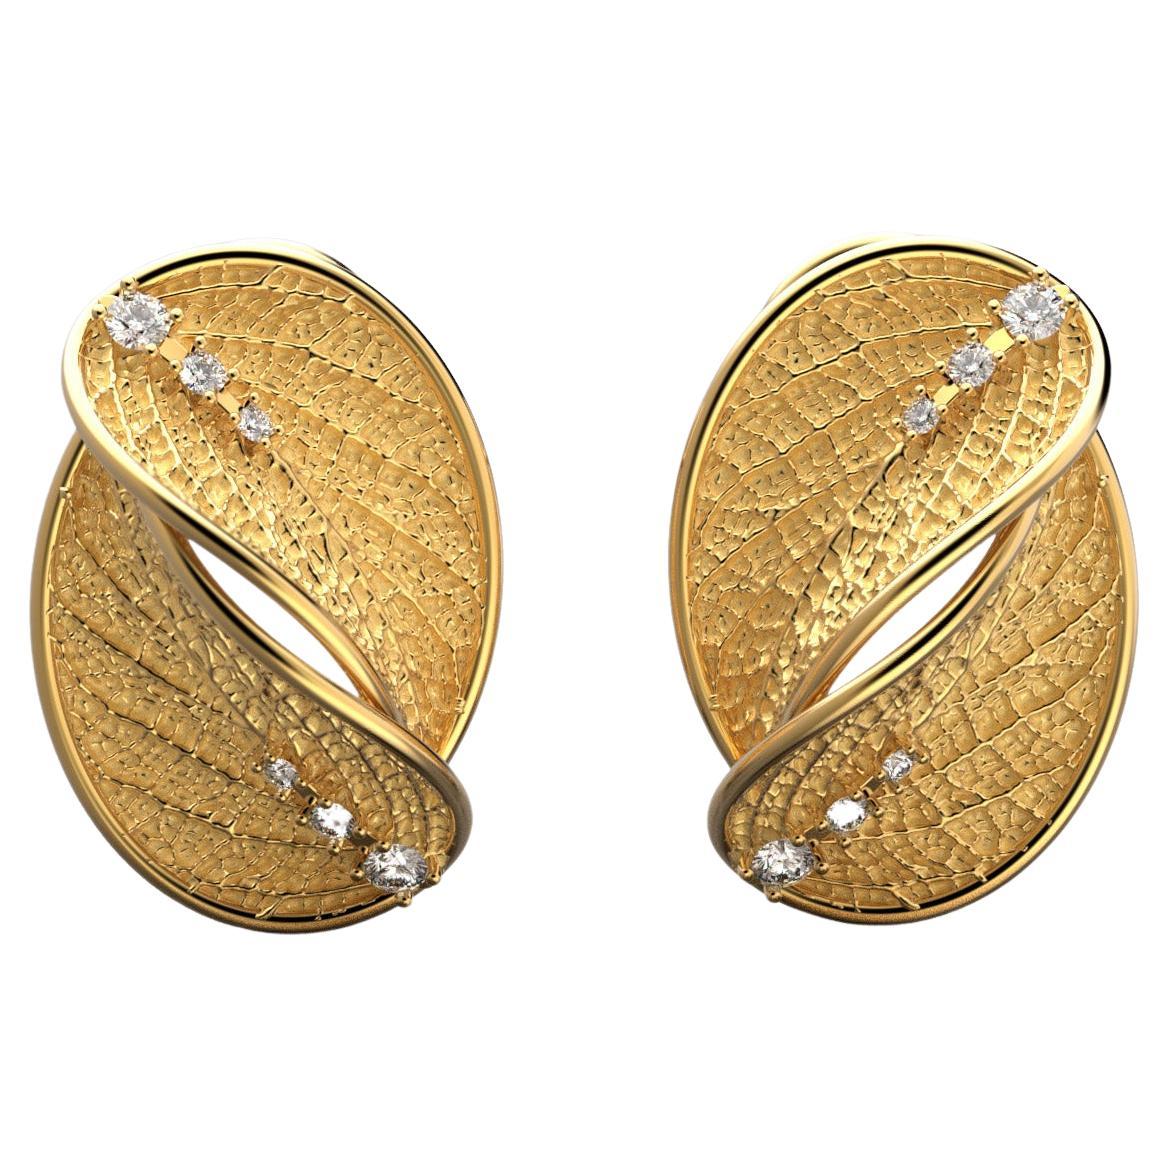 14k Gold Nature Inspired Diamond Stud Earrings with Leaf Design, Italian Jewelry For Sale